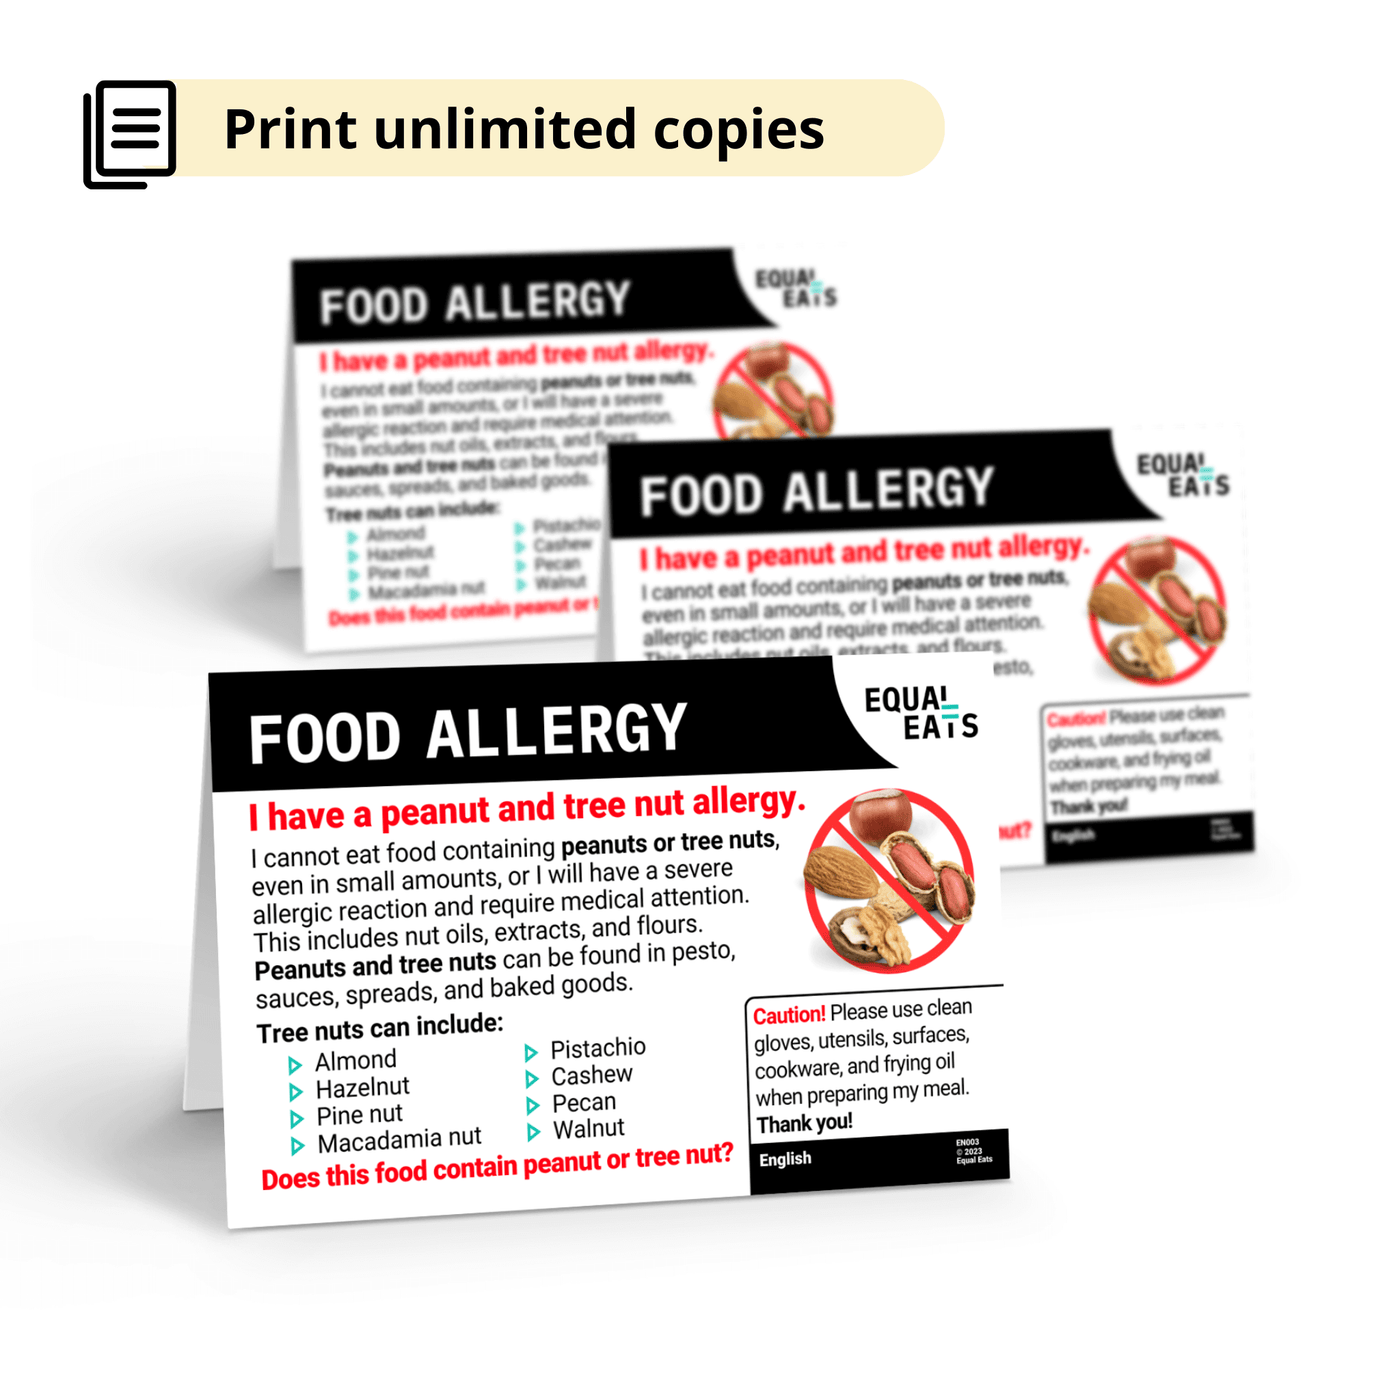 Printable Peanut and Tree Nut Allergy Card in Lao